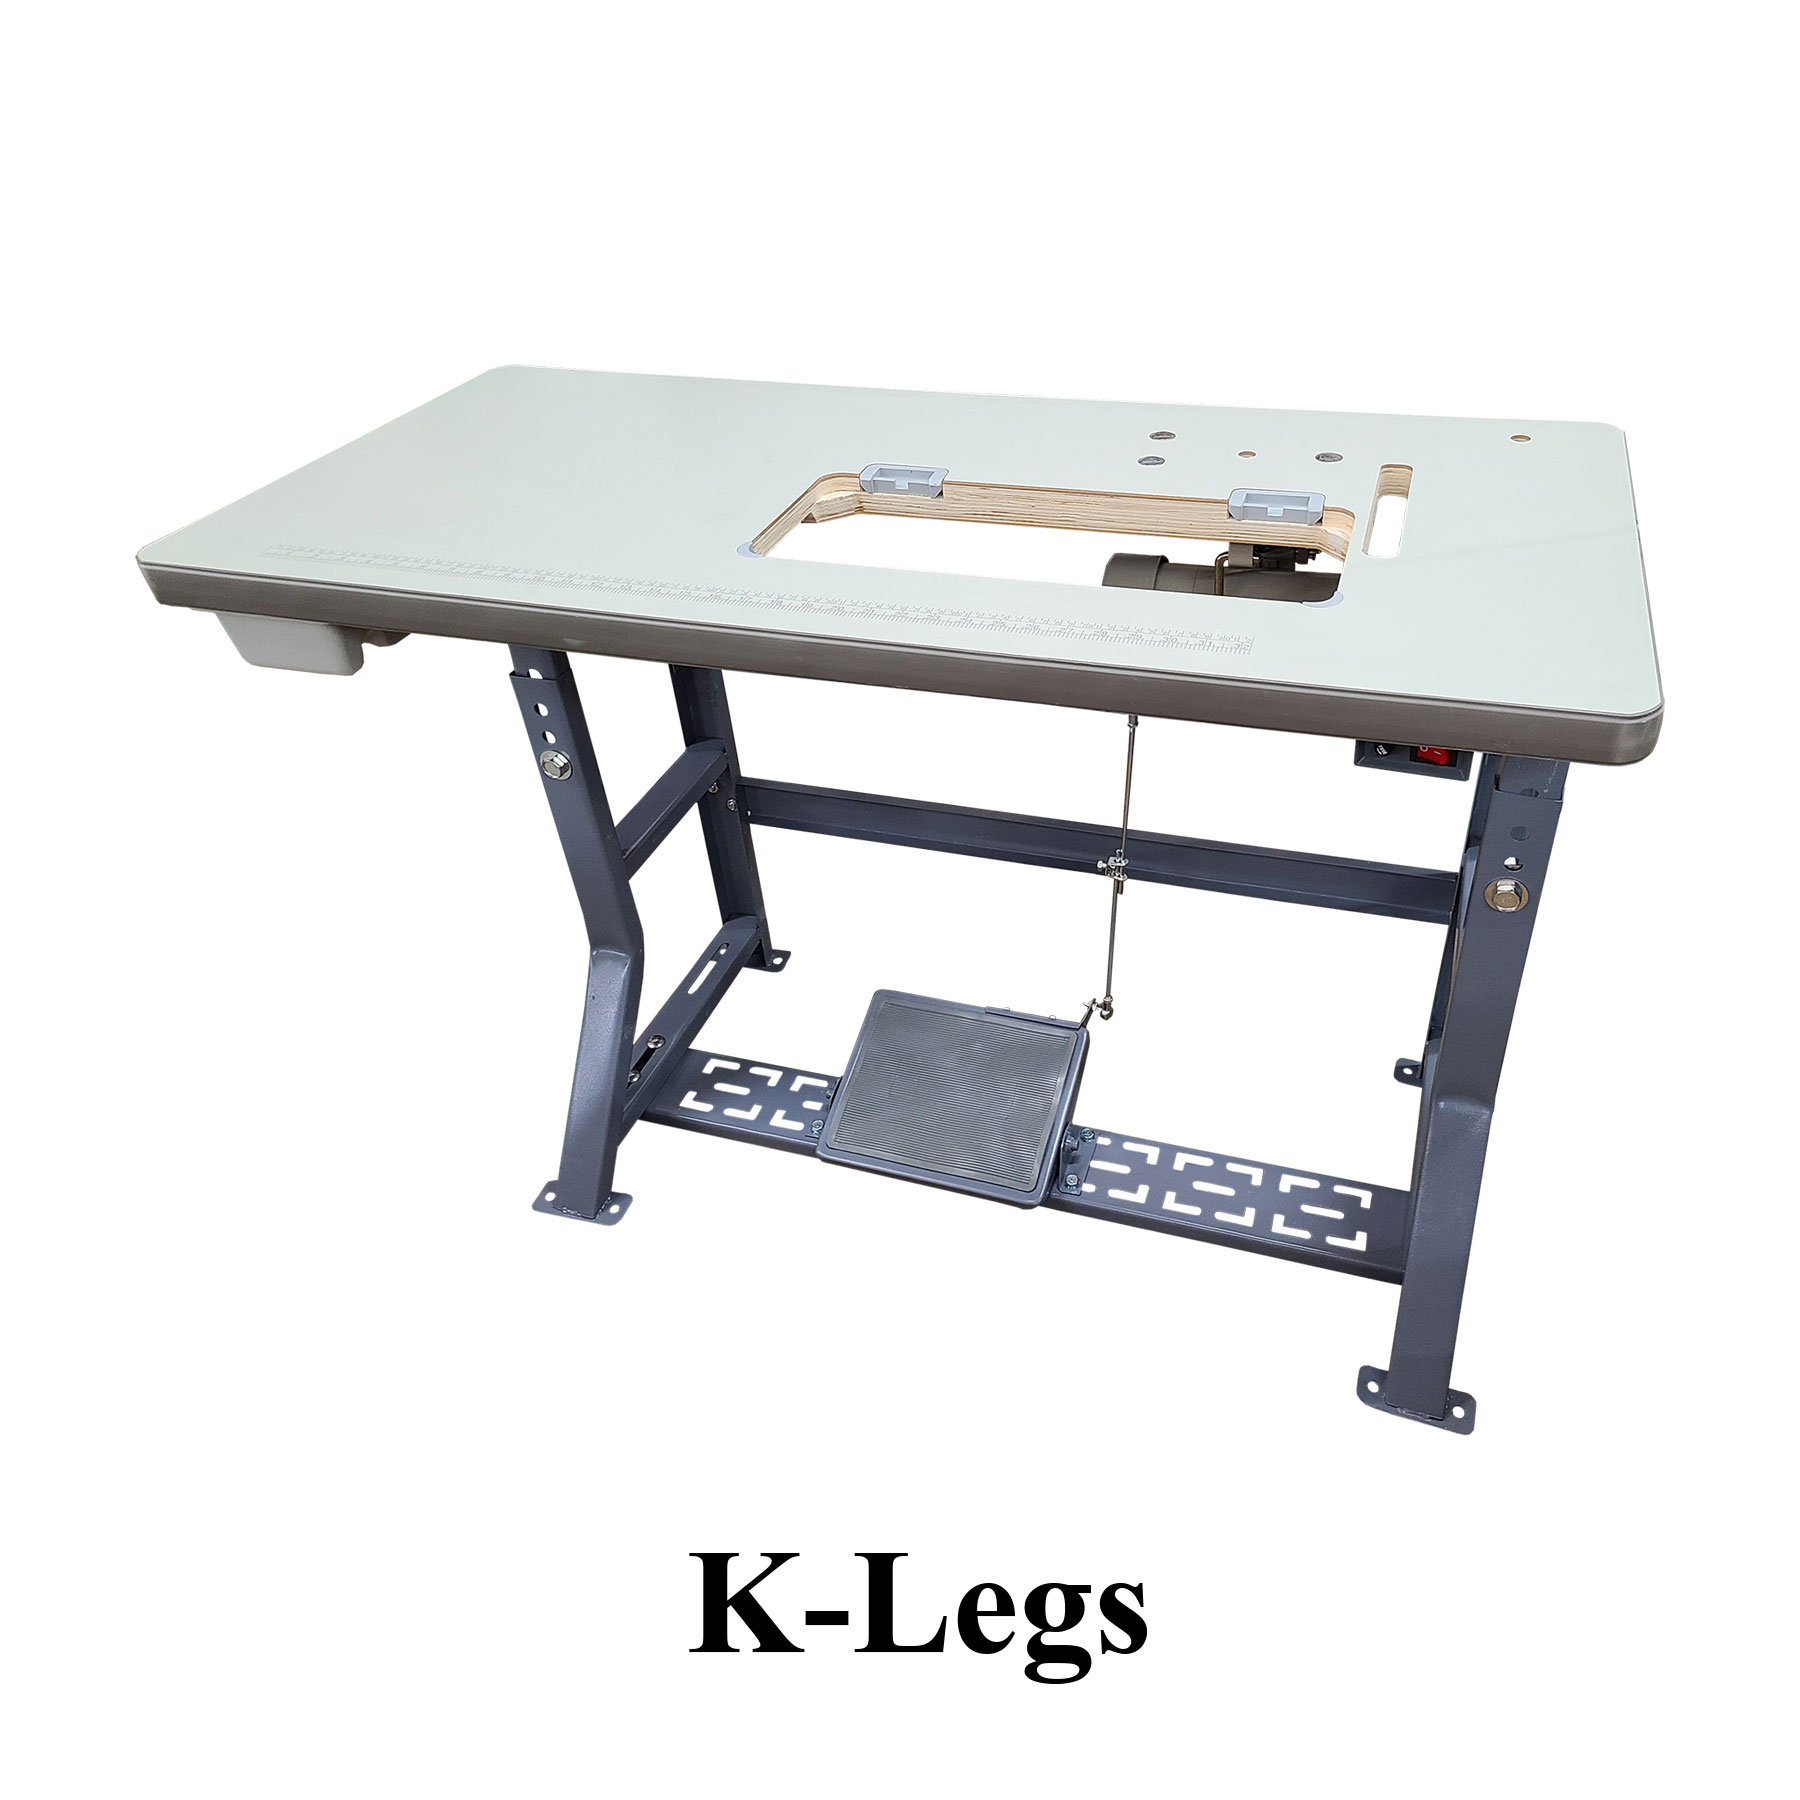 Thread Stand for sewing machine tables